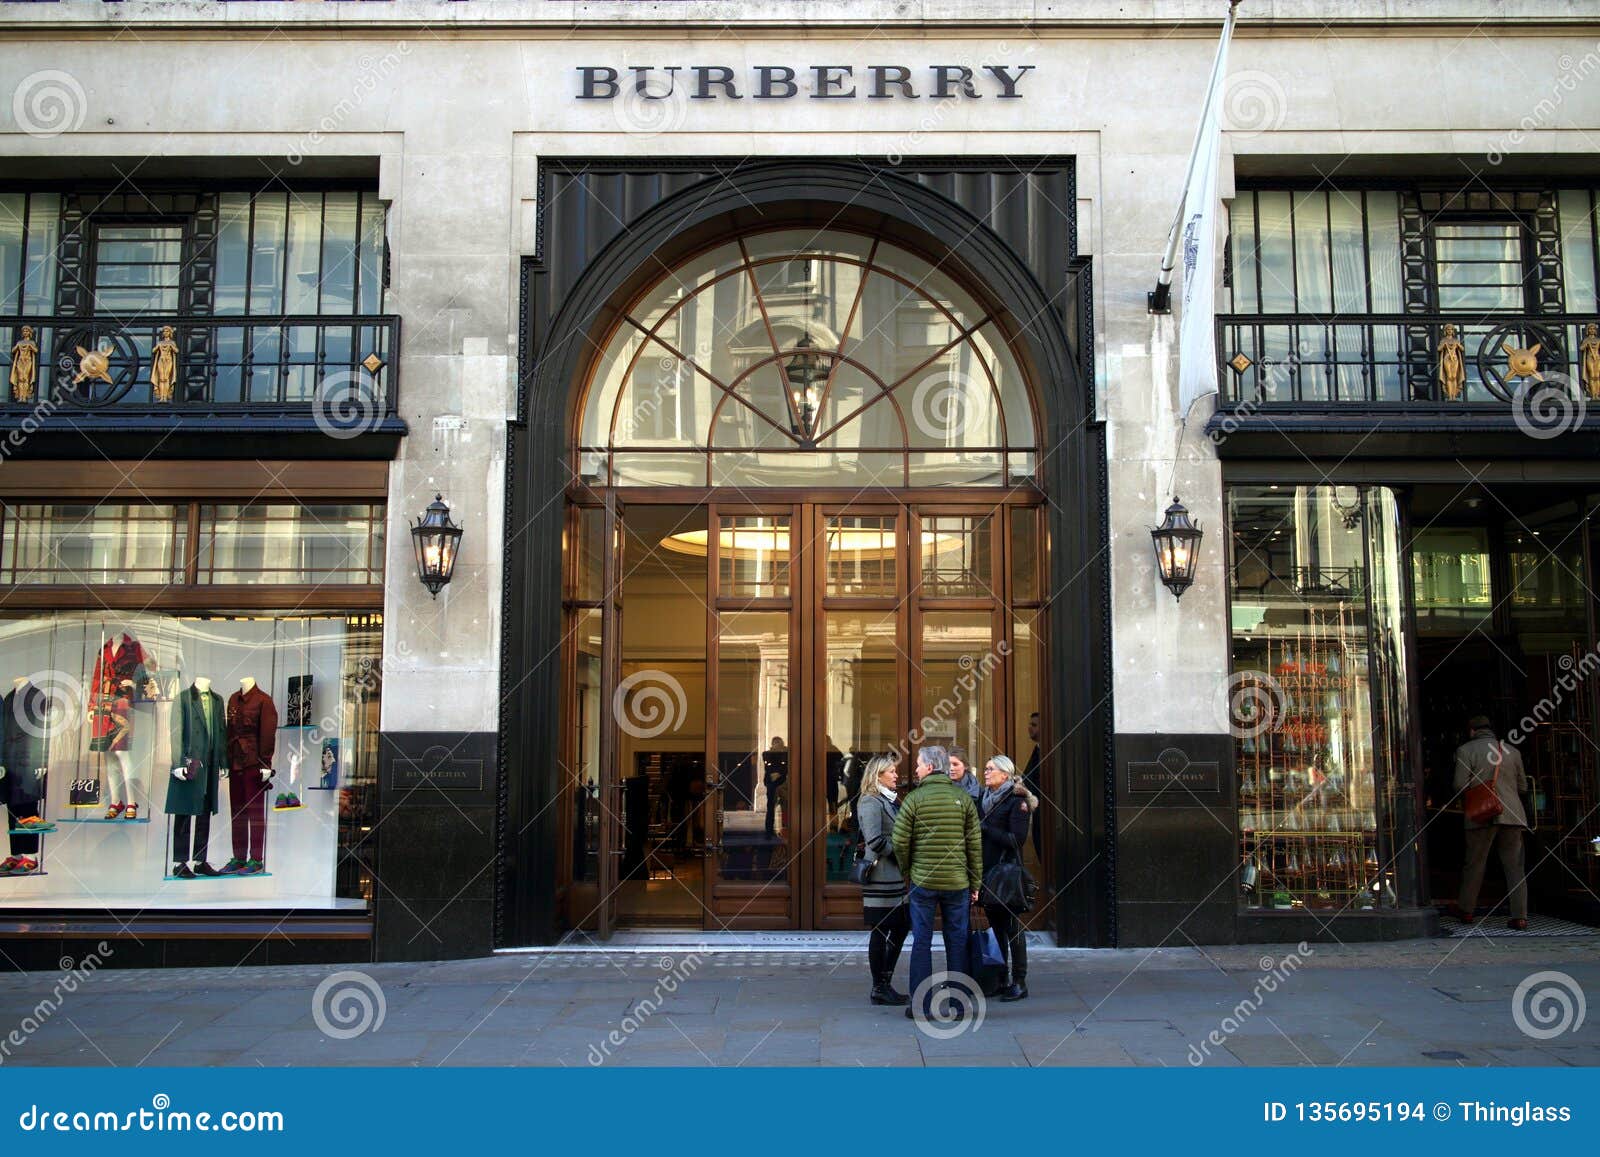 Burberry Clothing Store in London Editorial Stock Image - Image of burberry, britain: